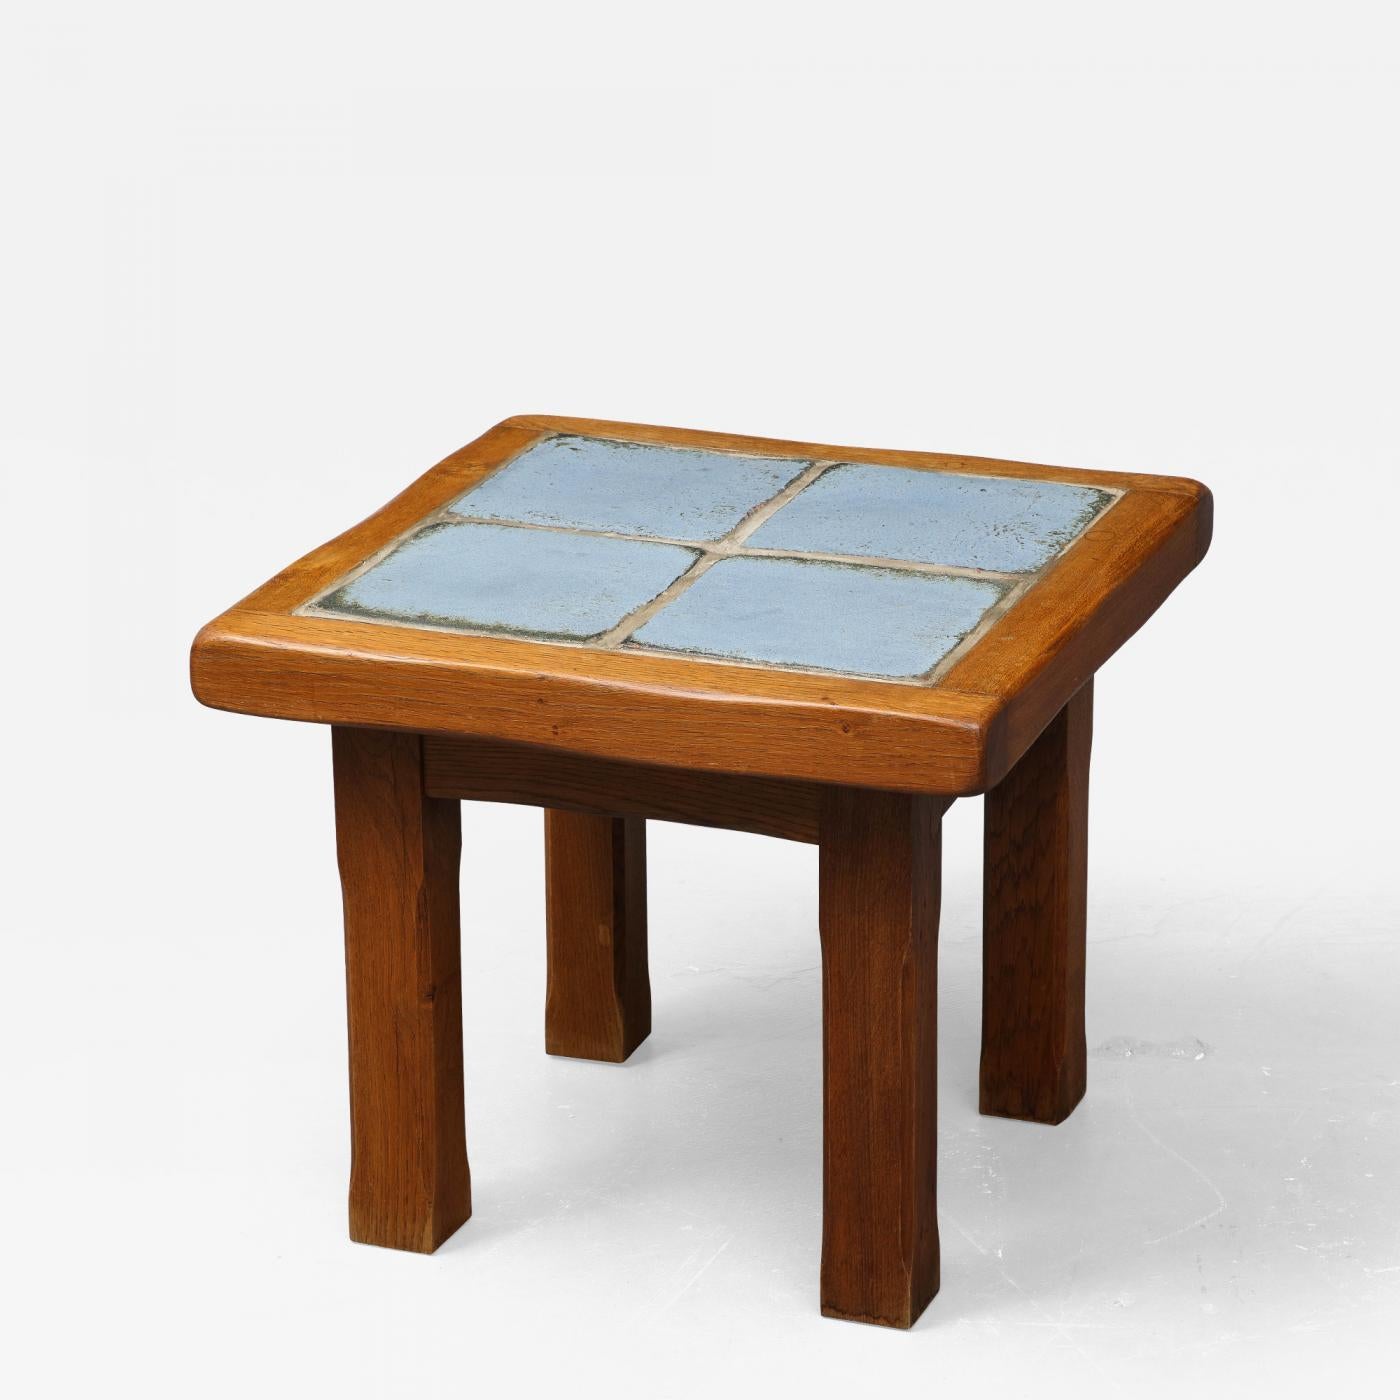 Handmade Elm and Glazed Ceramic tTle Table, France

Beautiful side table with finely crafted details.

